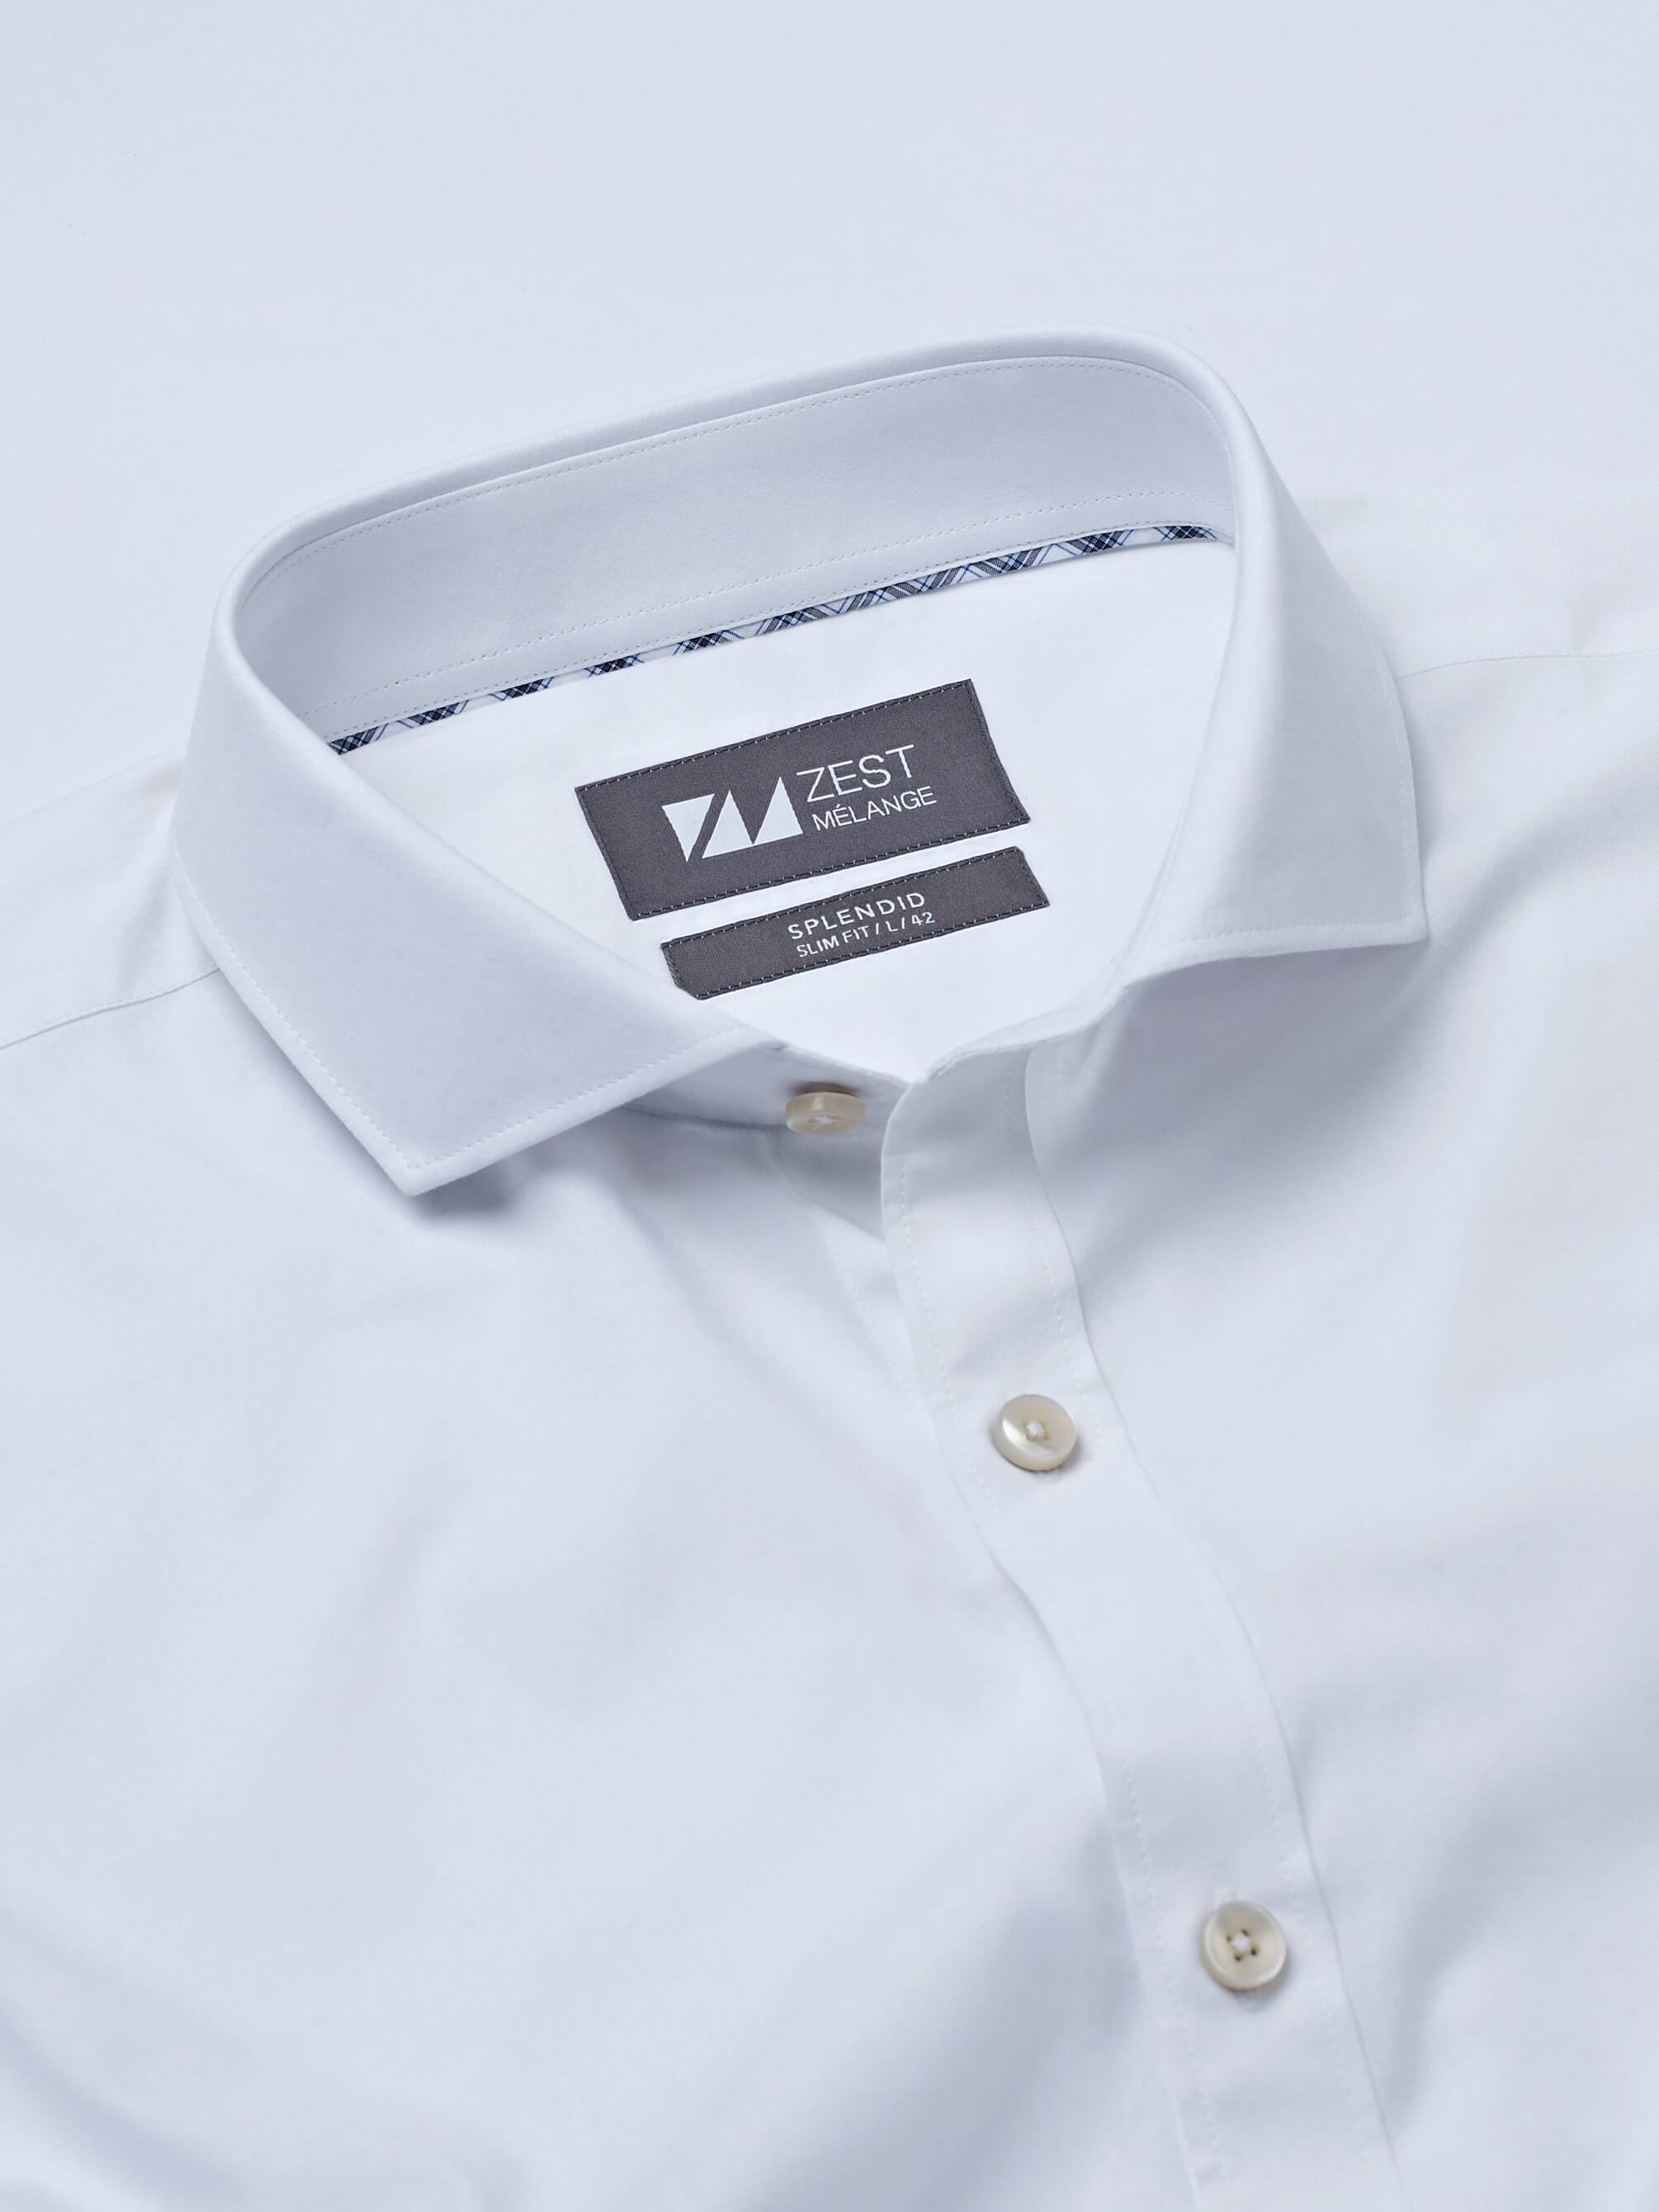 Cut Way Collar Shirt with Contrast Piping Detail - Zest Mélange 